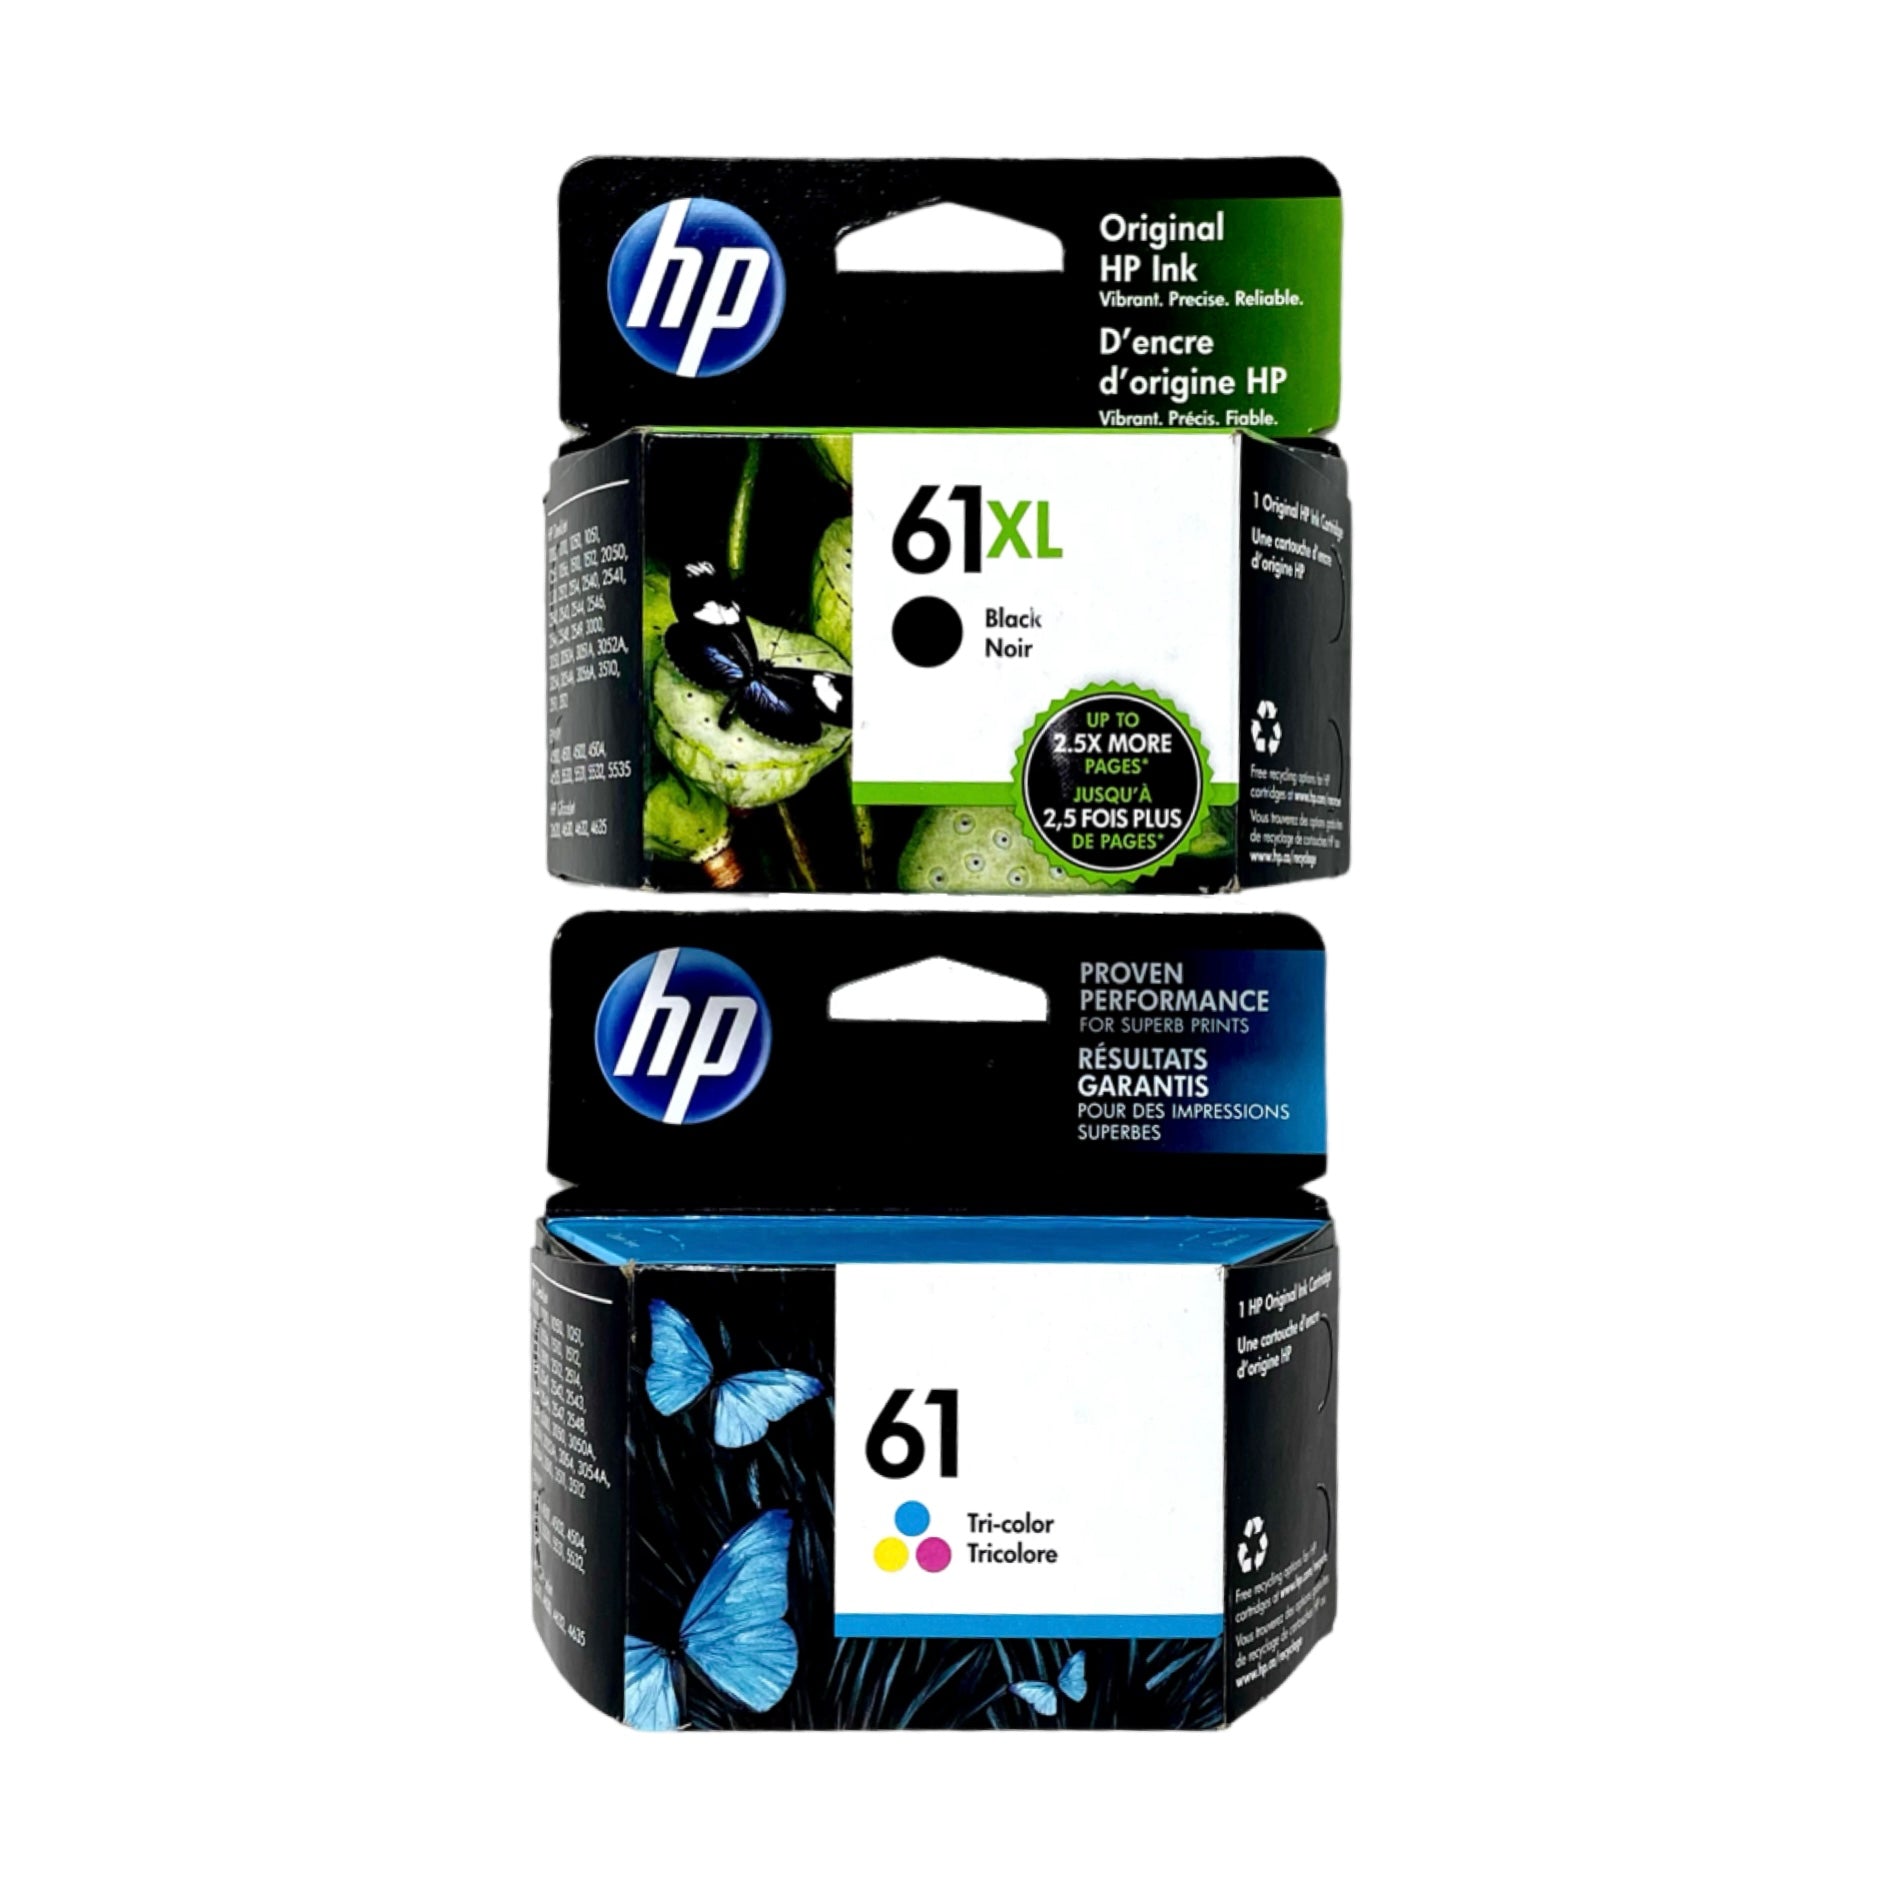 Genuine HP 61XL Black High-Yield and 61 Tri-Color Ink Cartridges Multi-Pack 2-Pack (CZ138FN